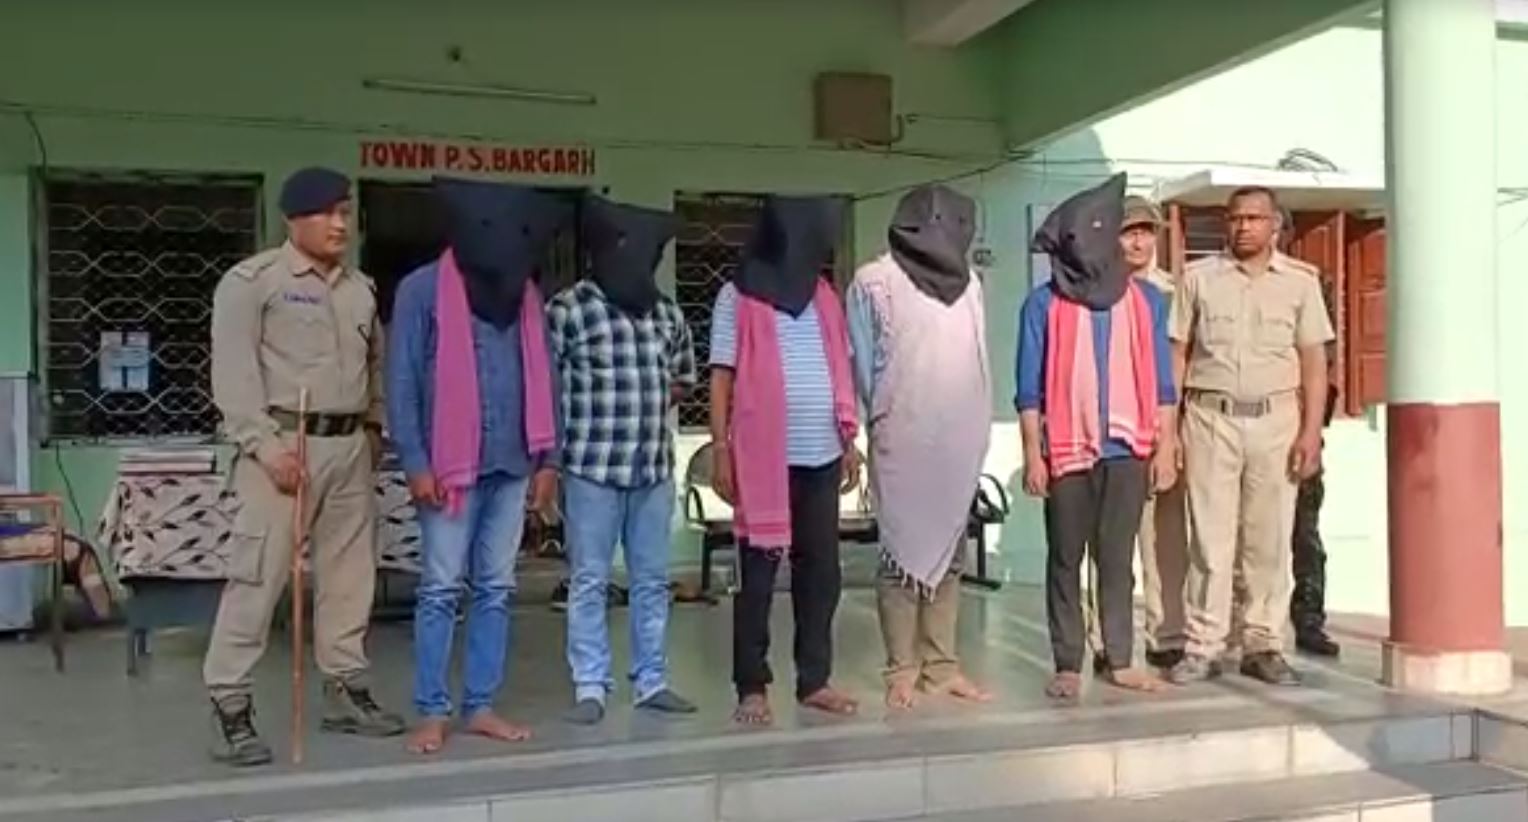 Bargarh Police Held 5 Person From UP In Fake Medicine Supply